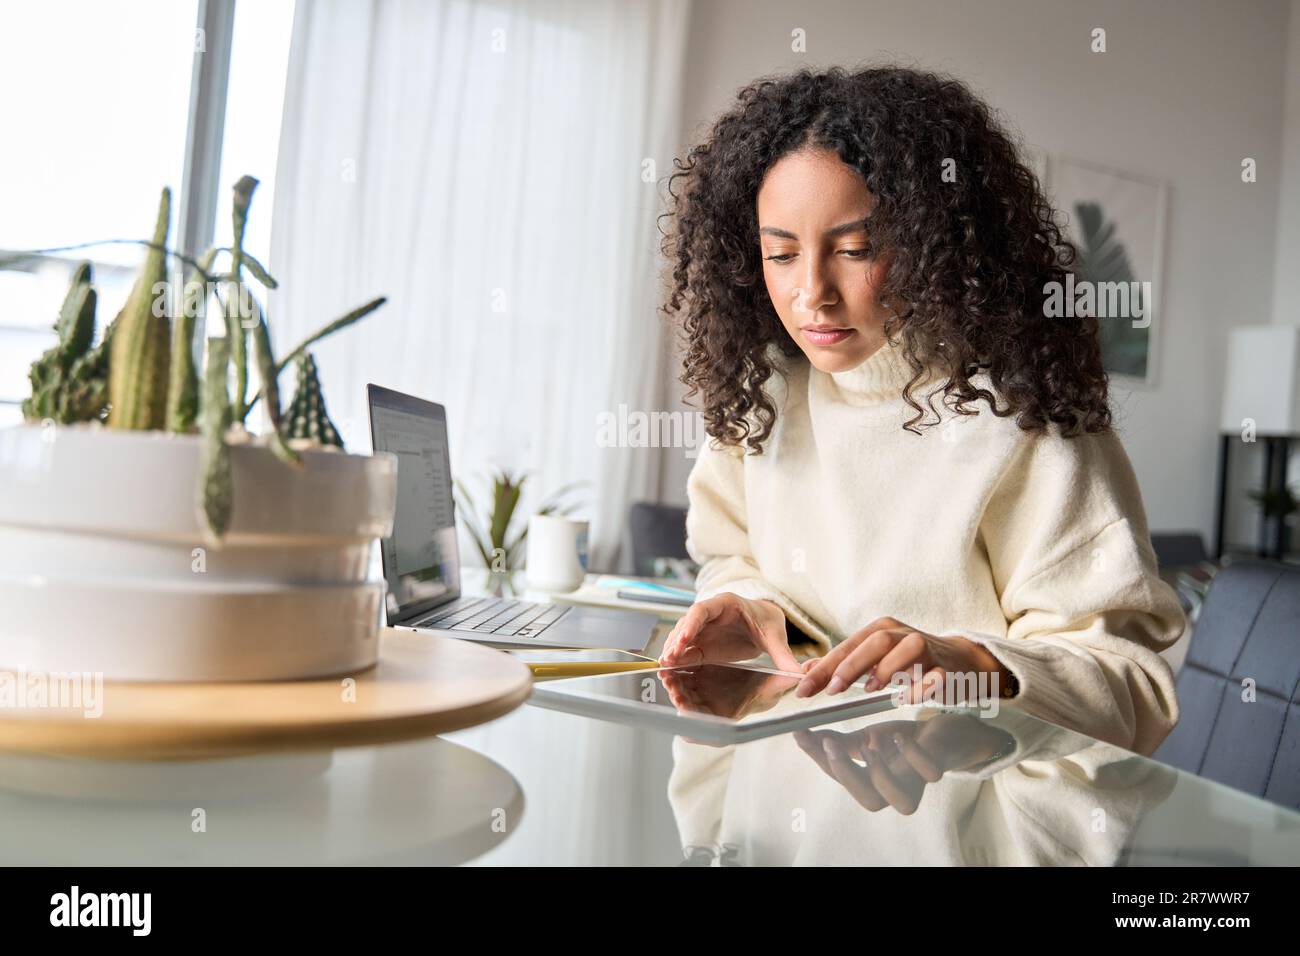 Young latin girl student using digital tablet elearning or working at home. Stock Photo